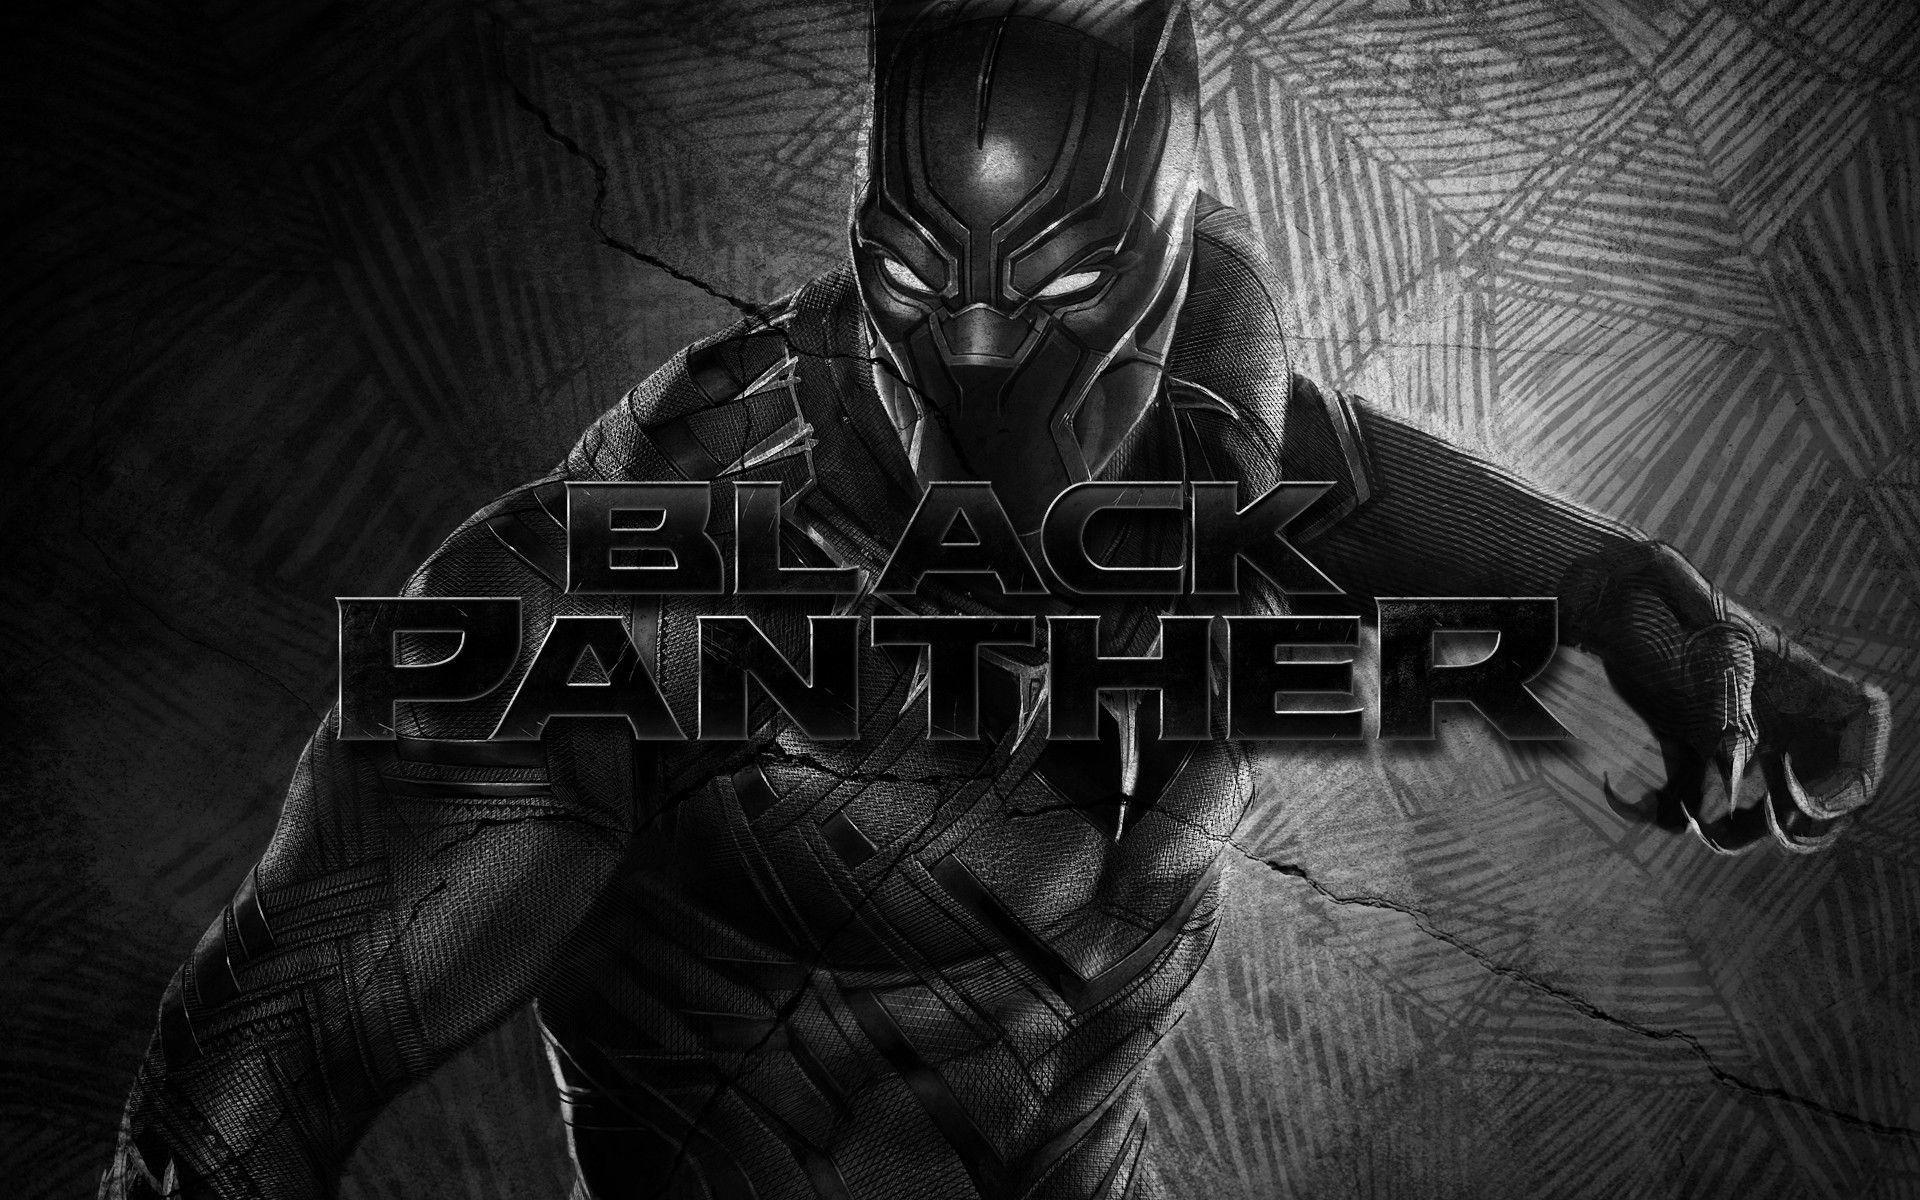 Collection of Black Panther Marvel Wallpaper on HDWallpaper